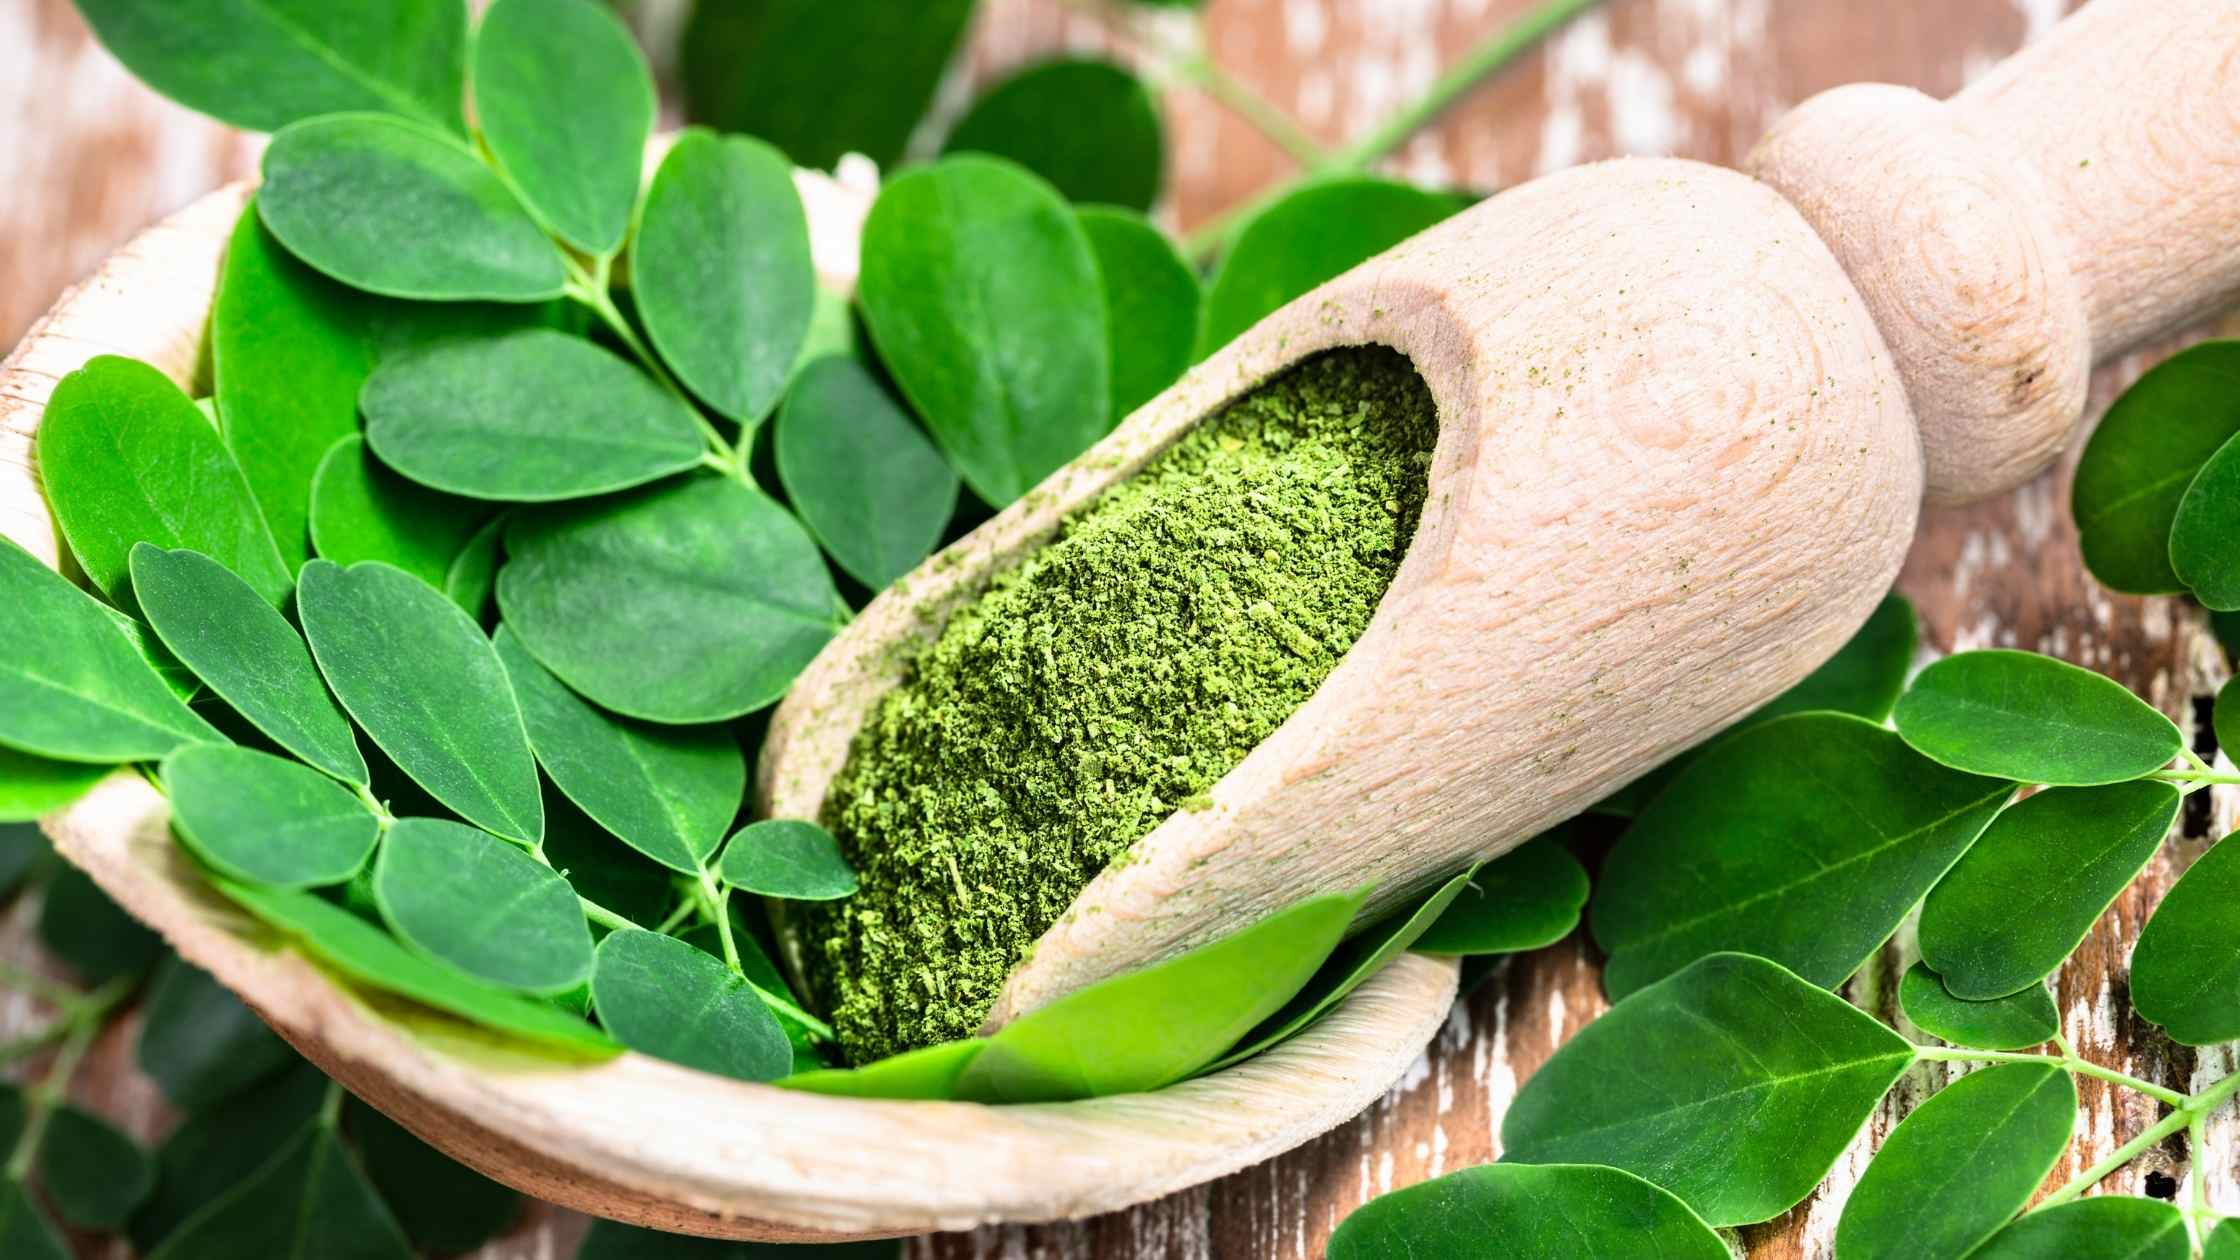 How Many Moringa Seeds To Eat Safely